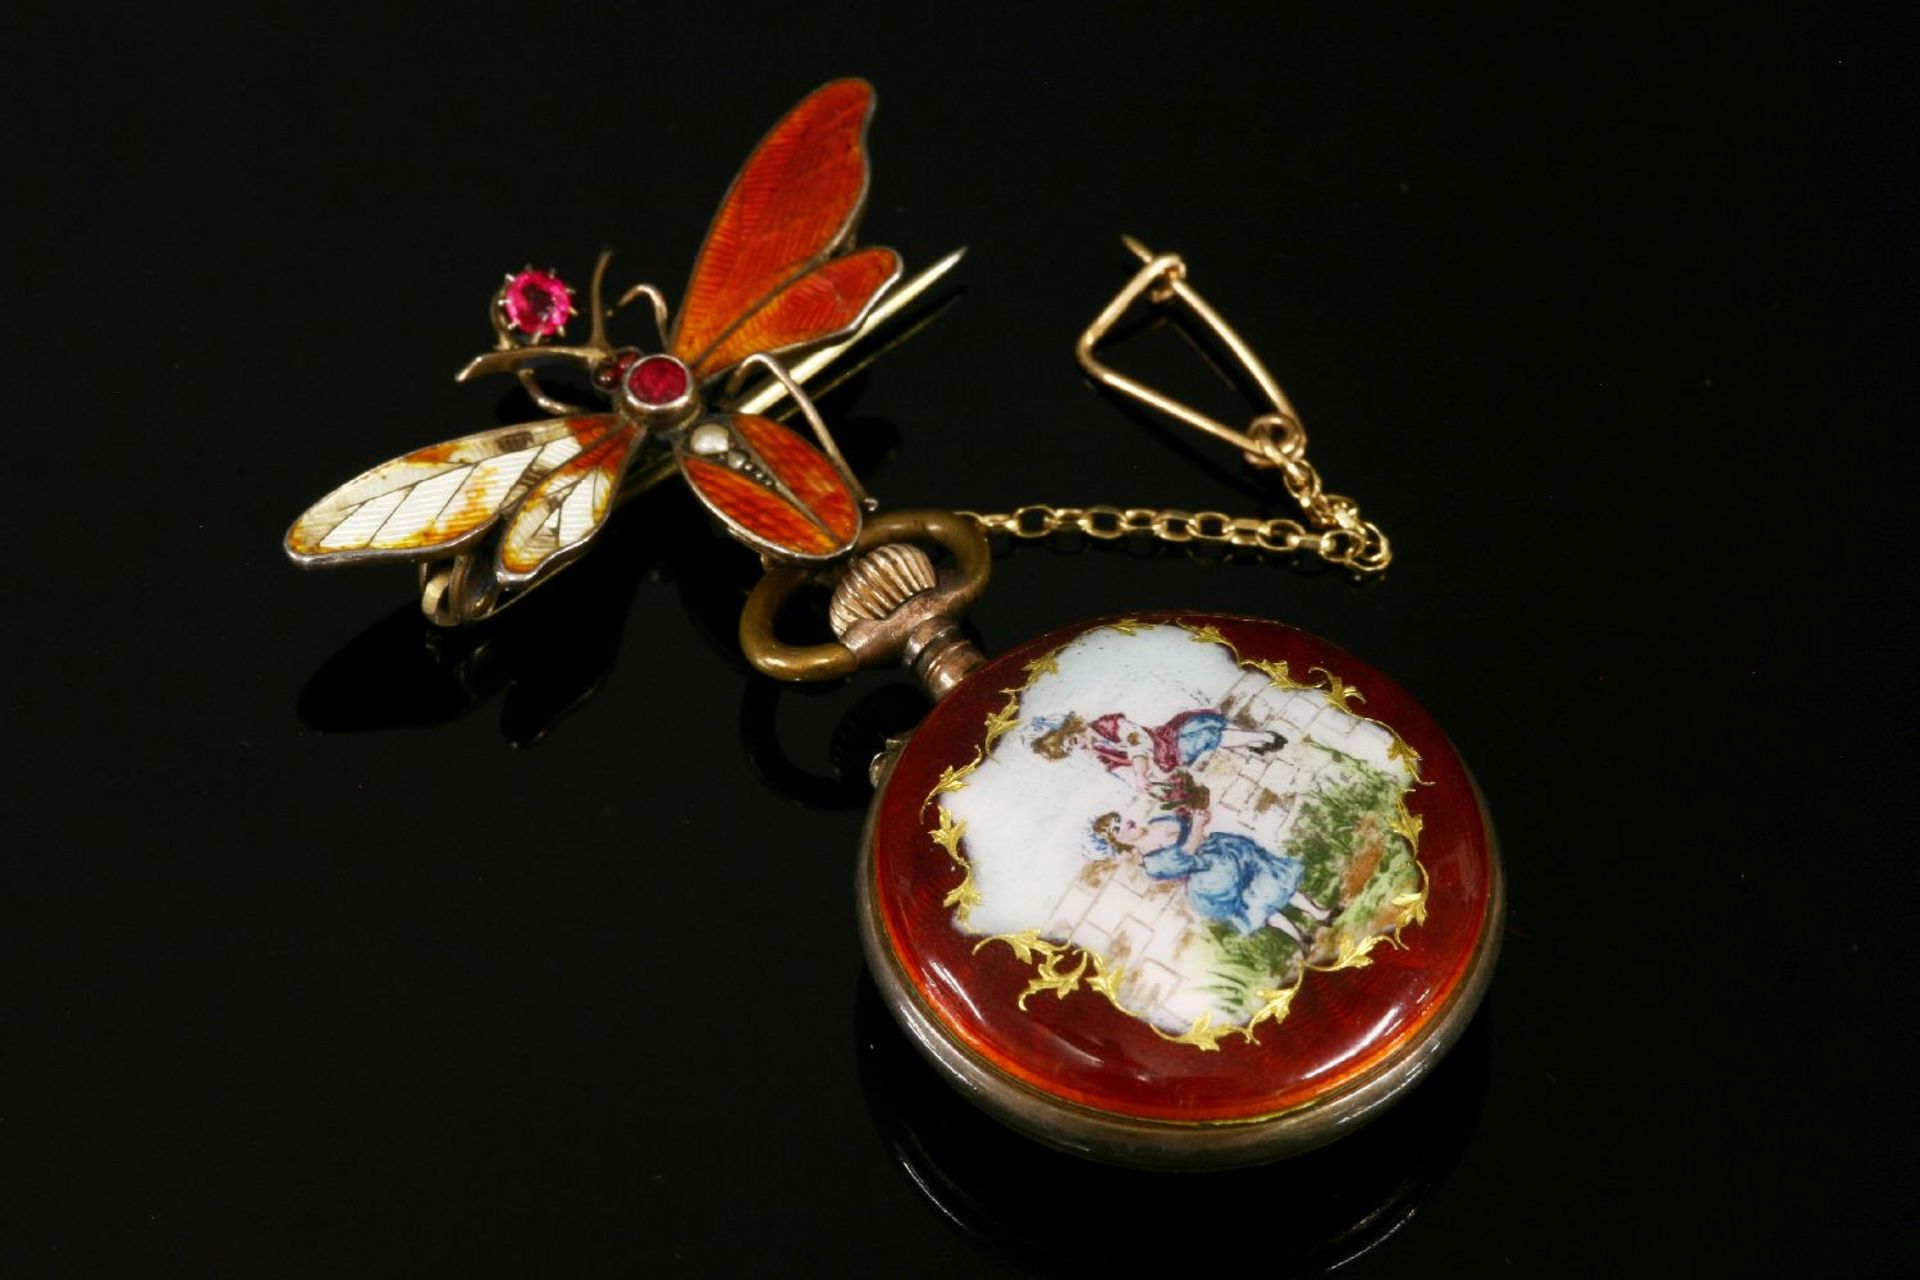 A Continental silver enamel fob watch,white enamel dial with Roman numerals, with gold hands. A